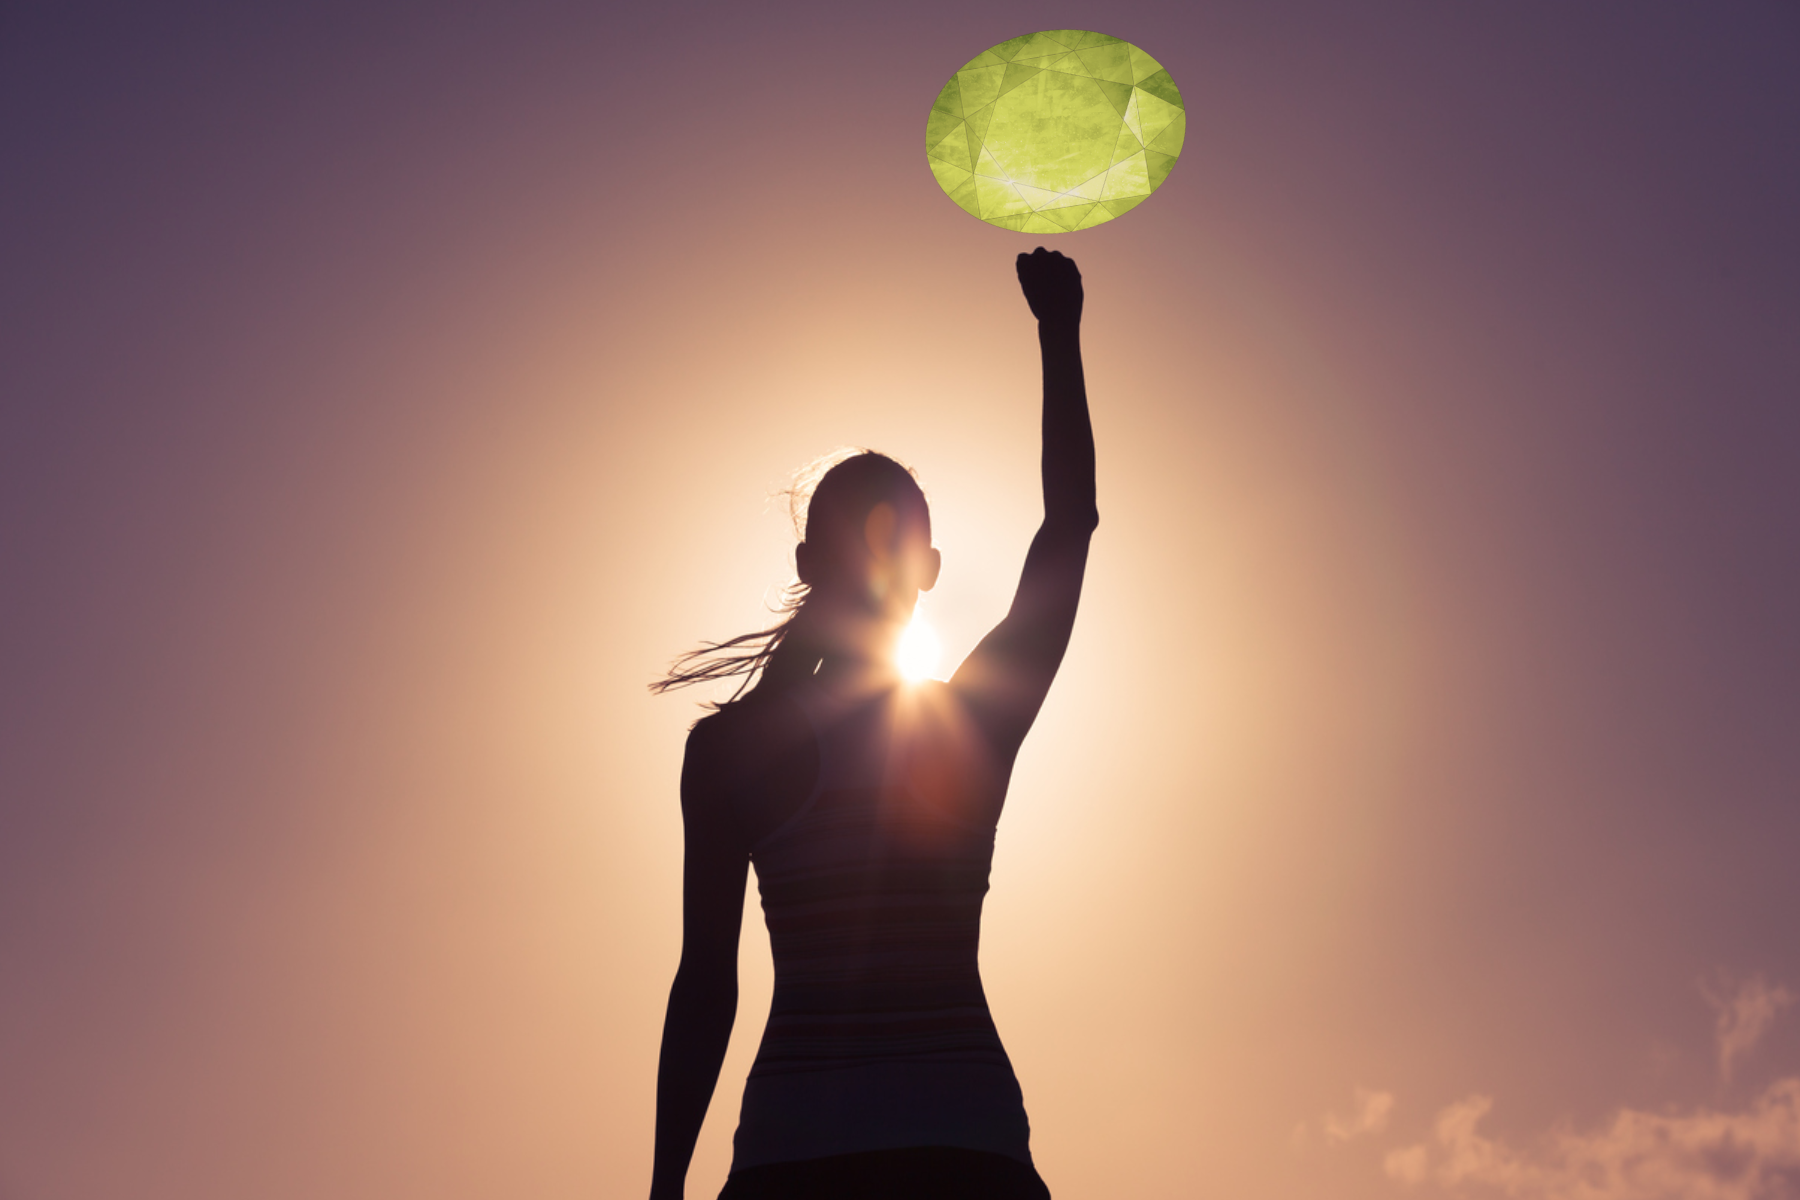 A woman's silhouette raising her hand, with a peridot on top